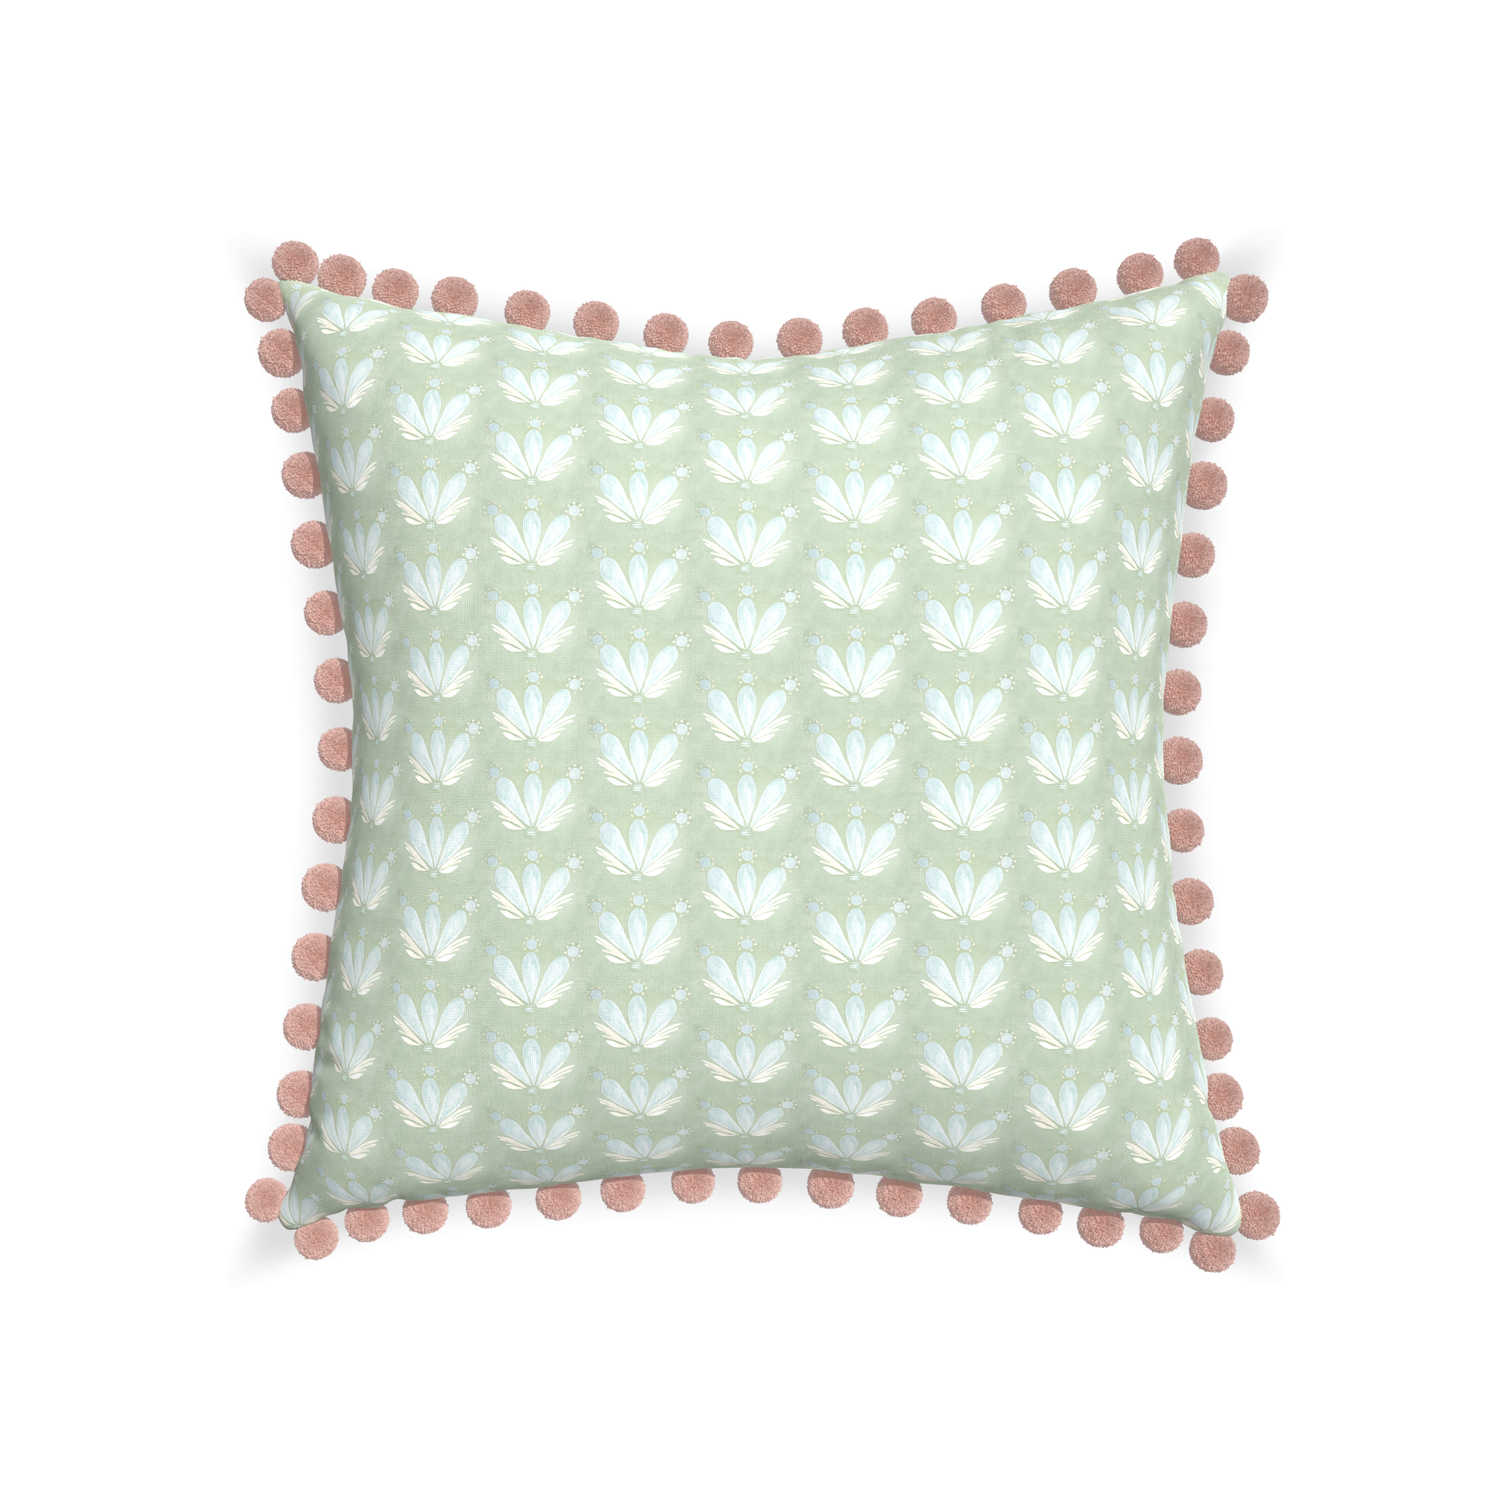 22-square serena sea salt custom blue & green floral drop repeatpillow with rose pom pom on white background